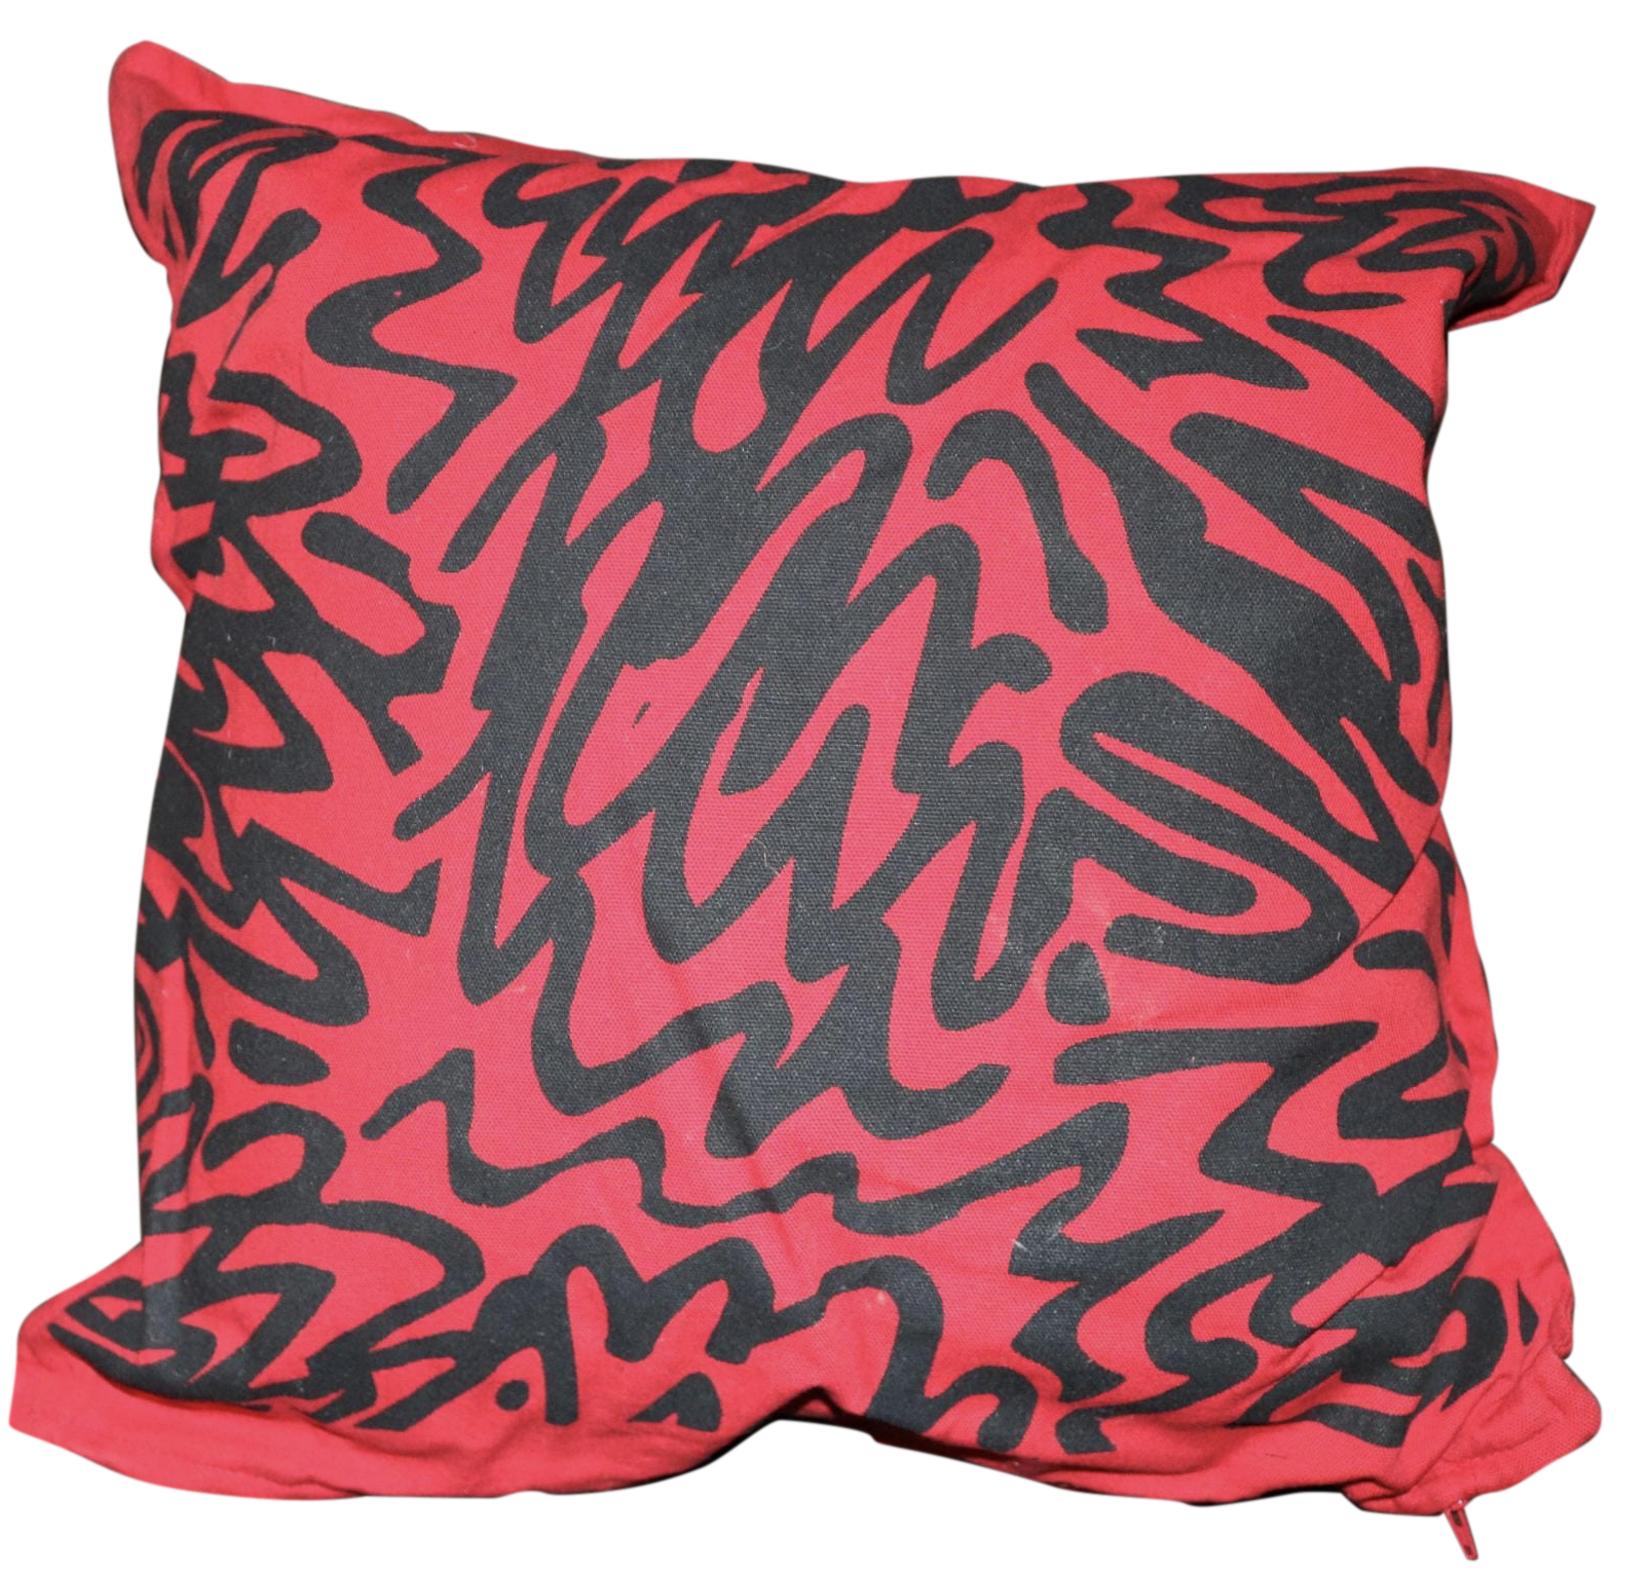 Hand-screen printed on cotton, the pillow design boasts a bold, simple pattern on a red background.